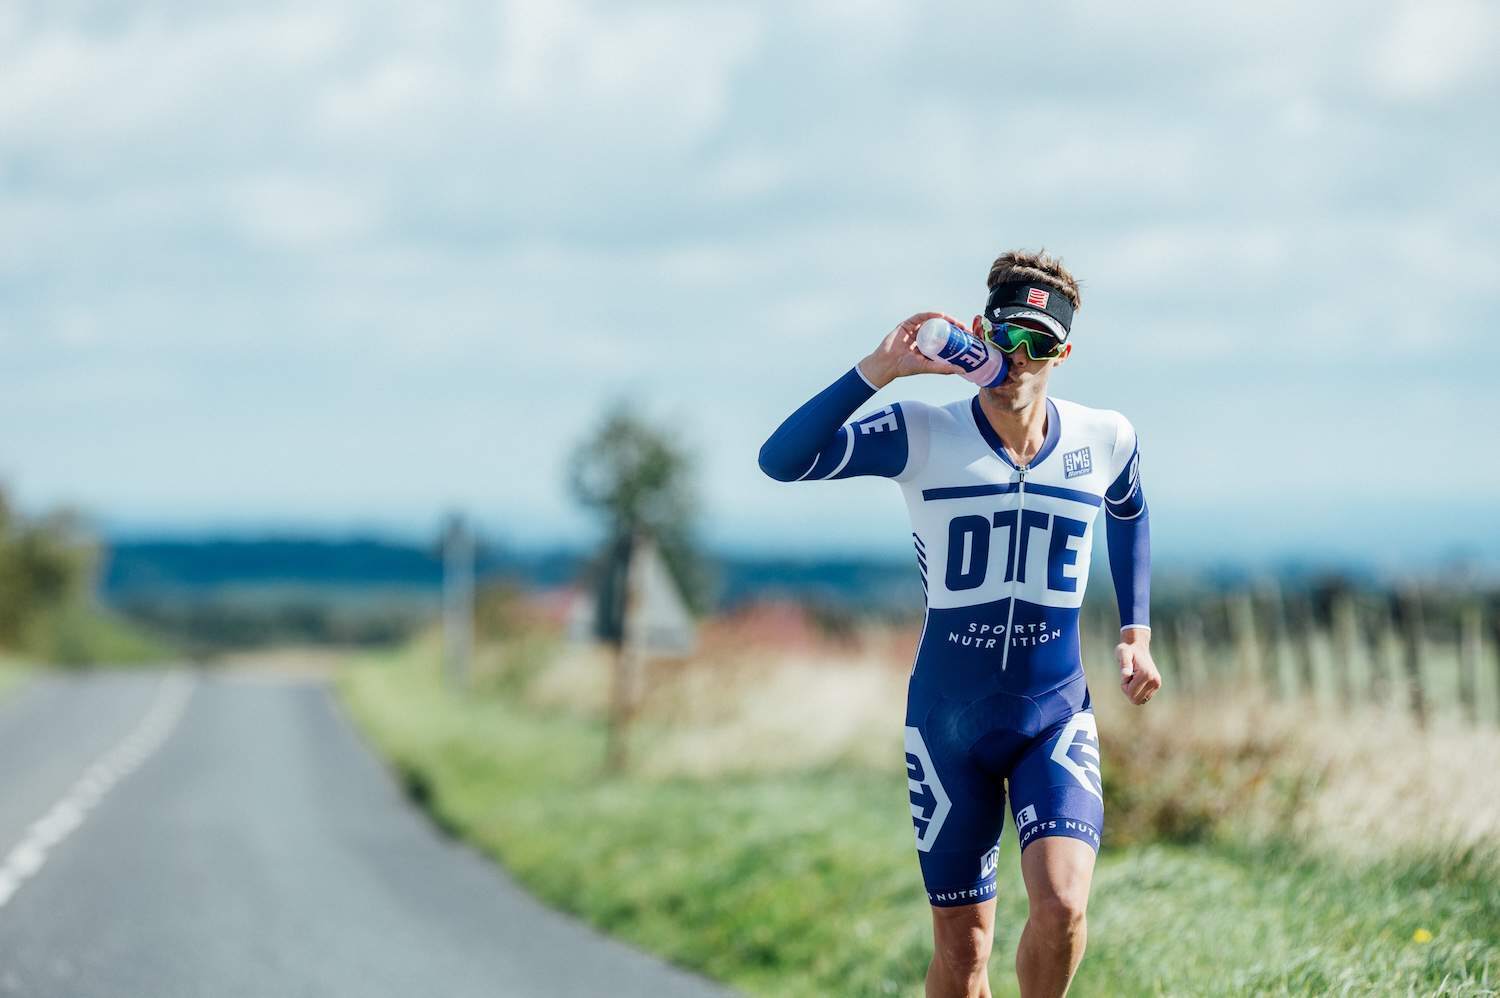 Running with OTE Tri Suit and Bottle